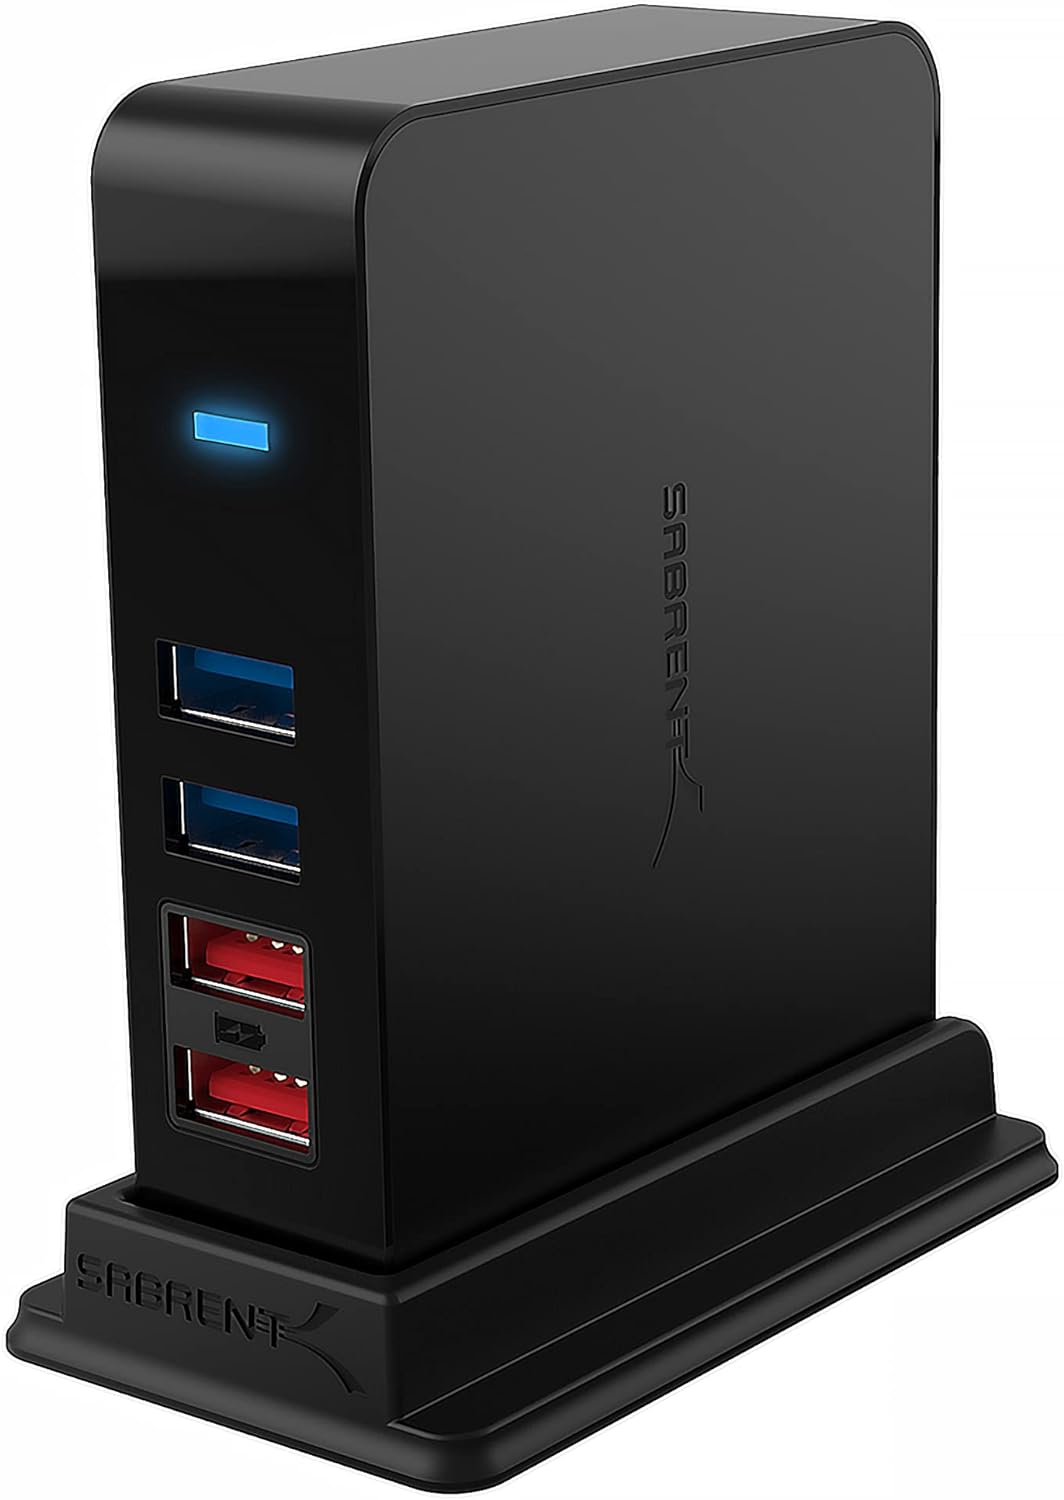 SABRENT 7 Port USB 3.0 HUB + 2 Charging Ports with 12V/4A Power Adapter